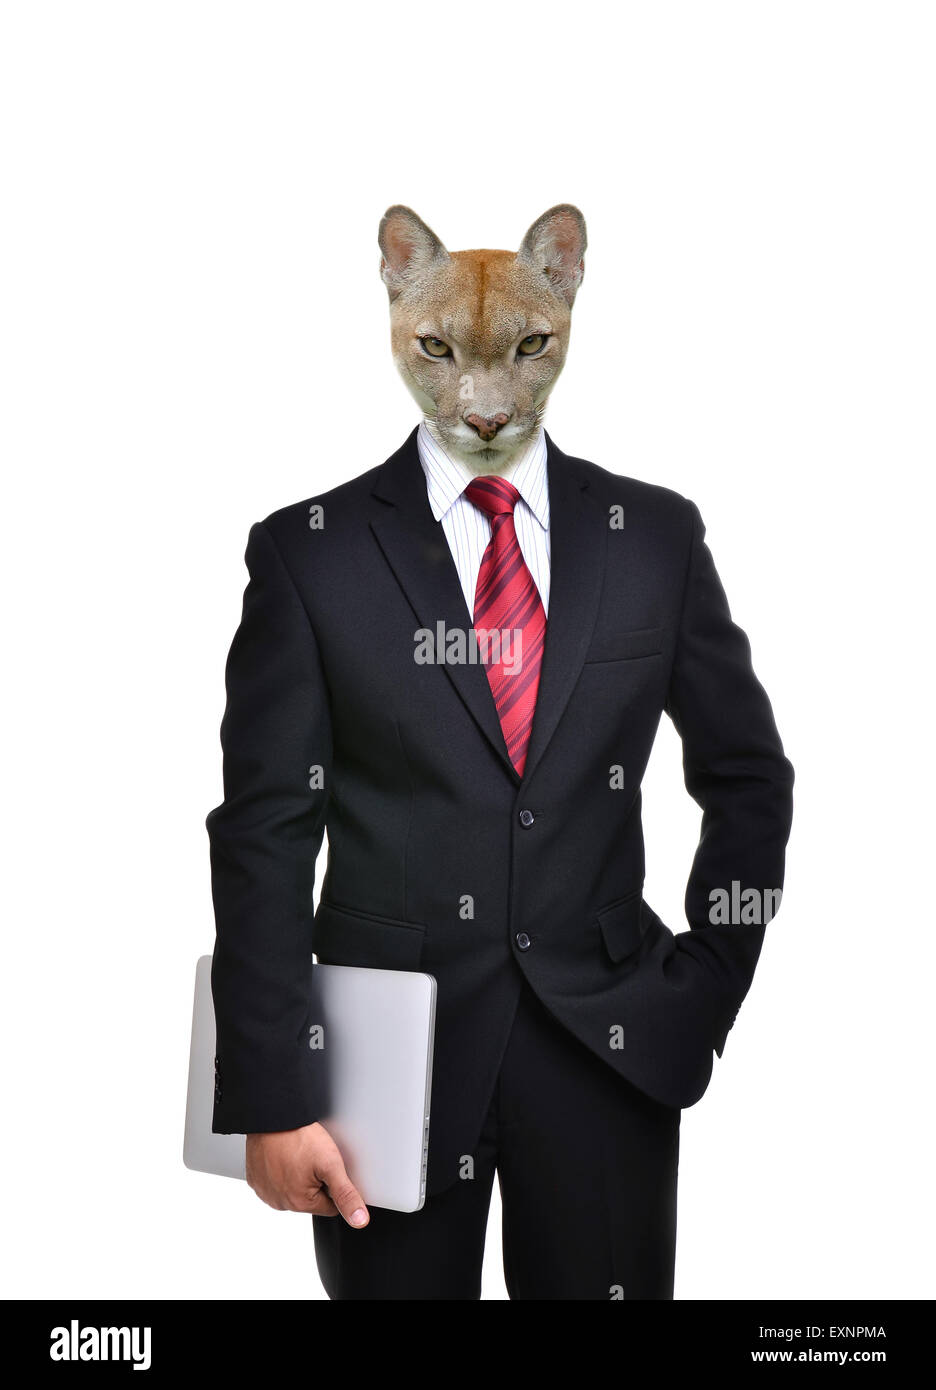 business man with animal head isolated on white background Stock Photo